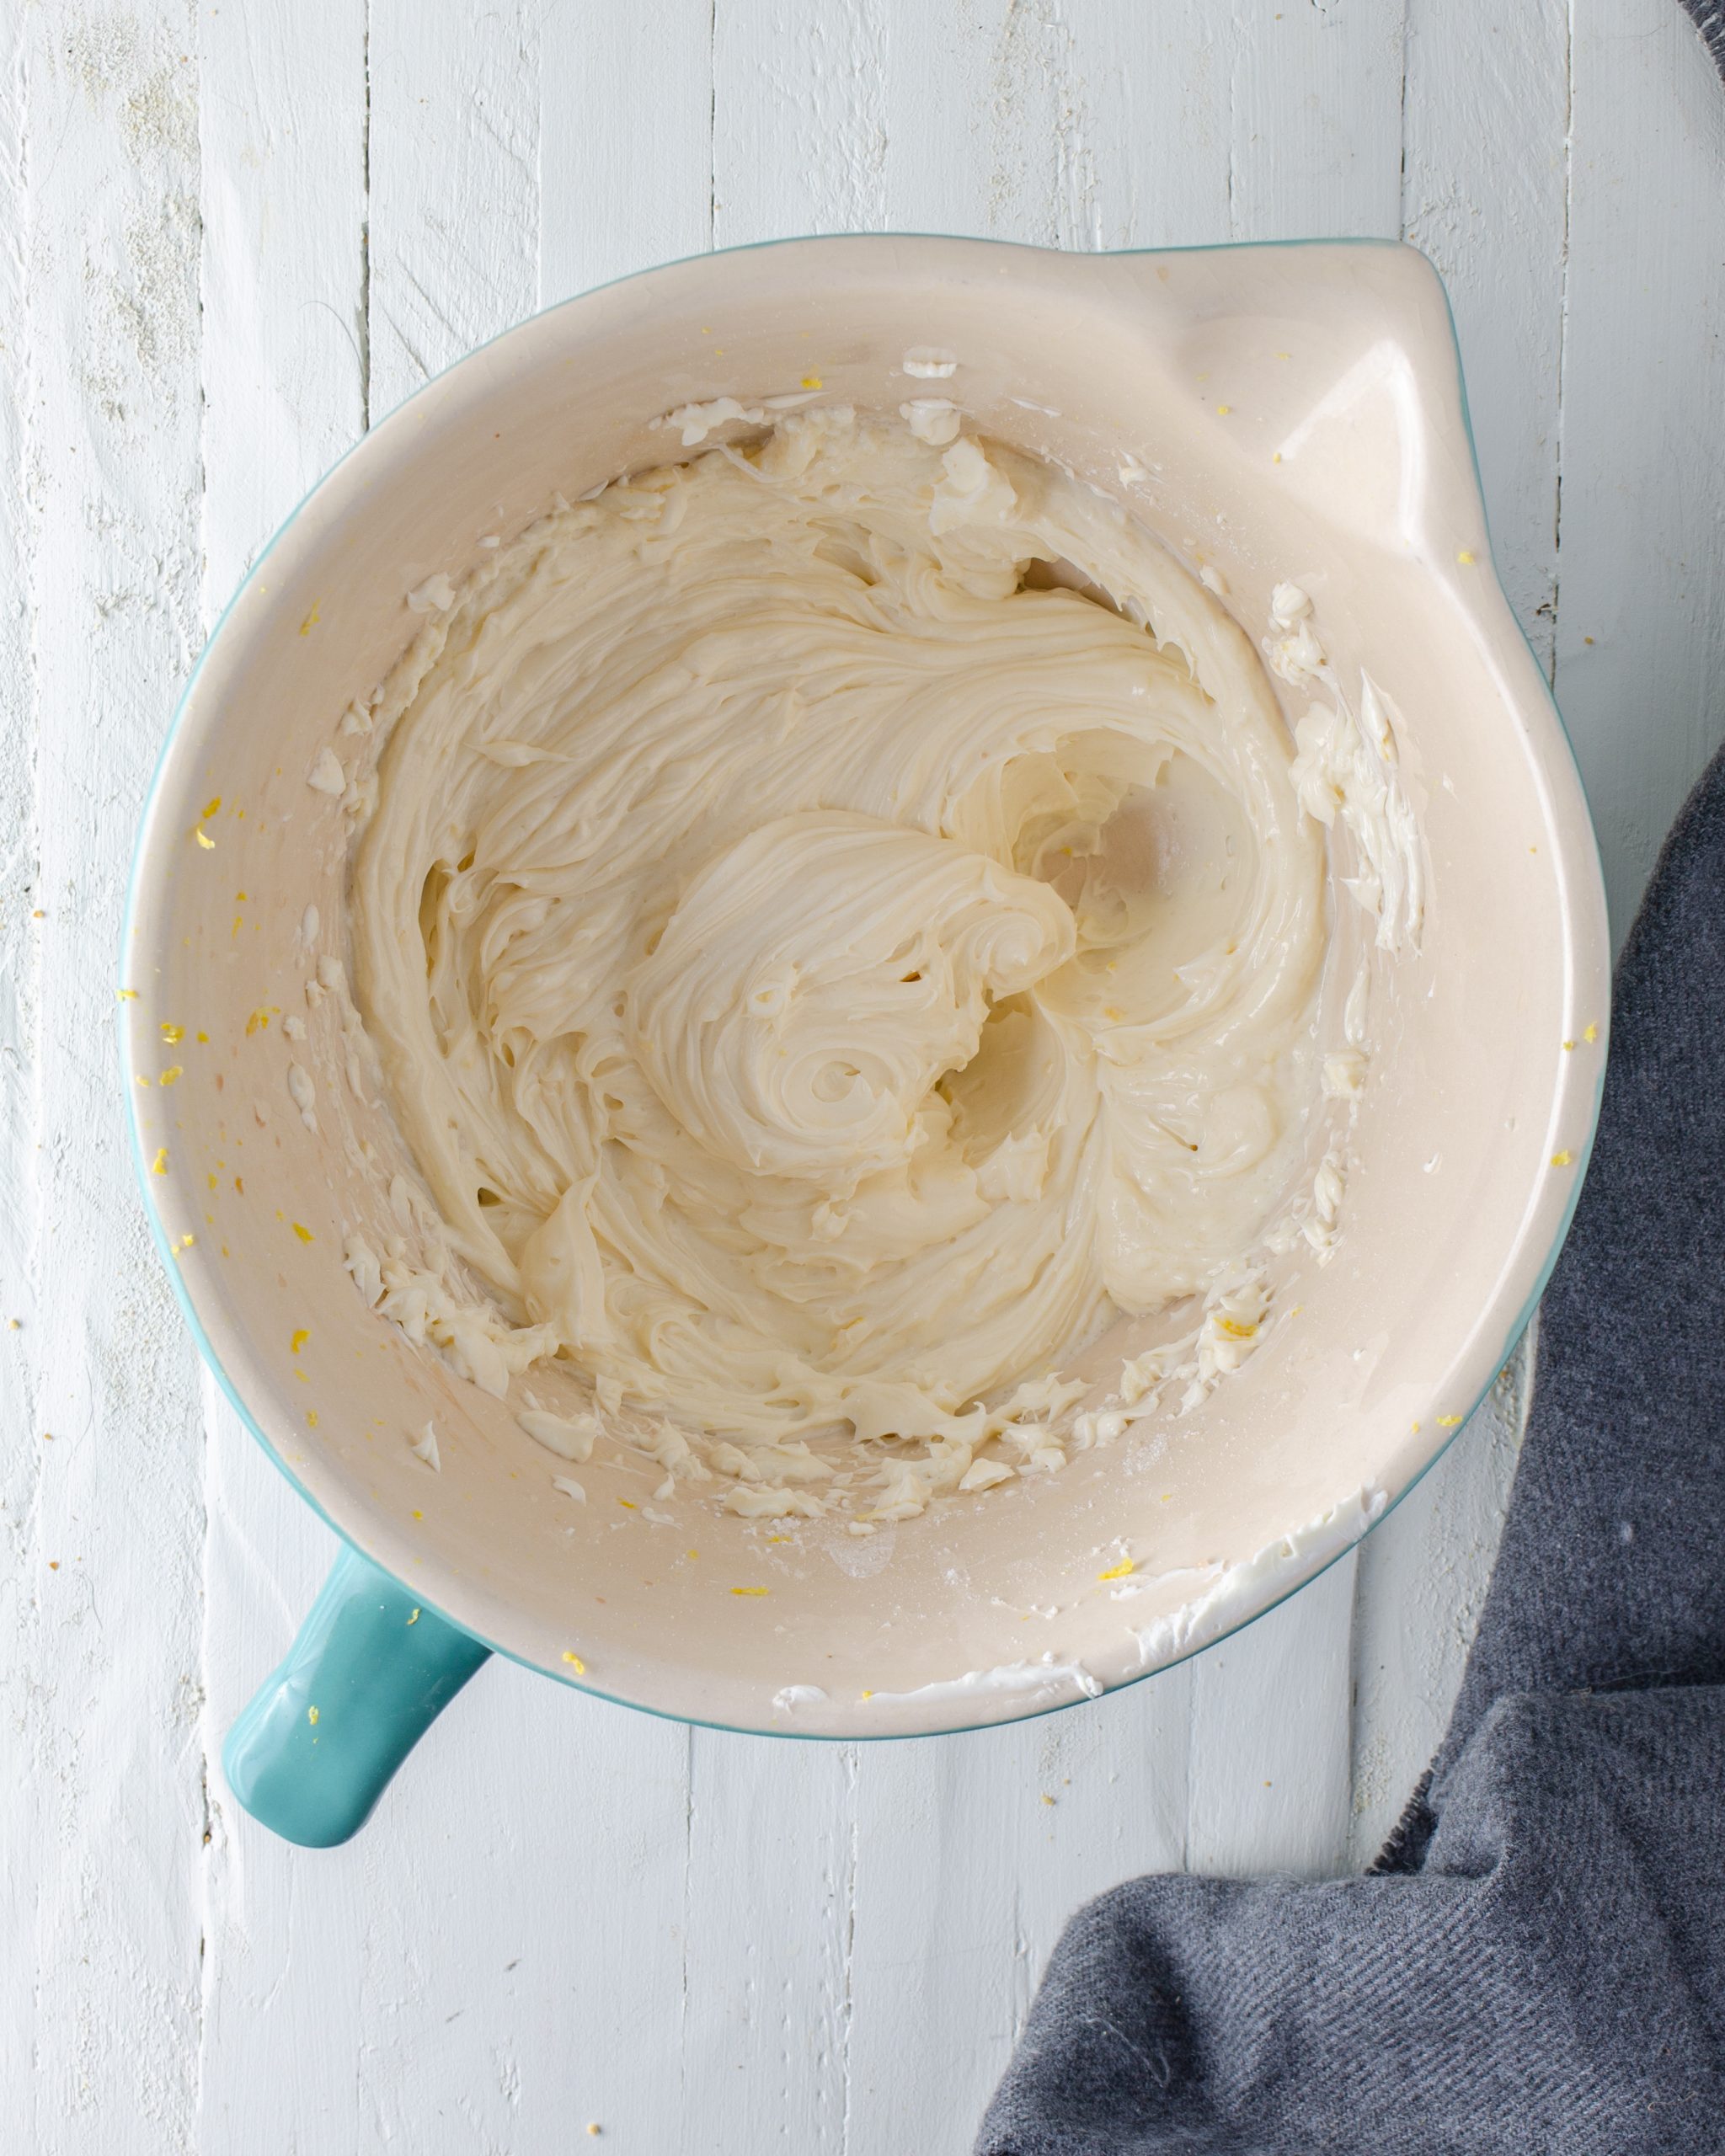 Blend together the cream cheese, powdered sugar, lemon zest, and vanilla in a mixing bowl until light and creamy. Chill for 30 minutes. 